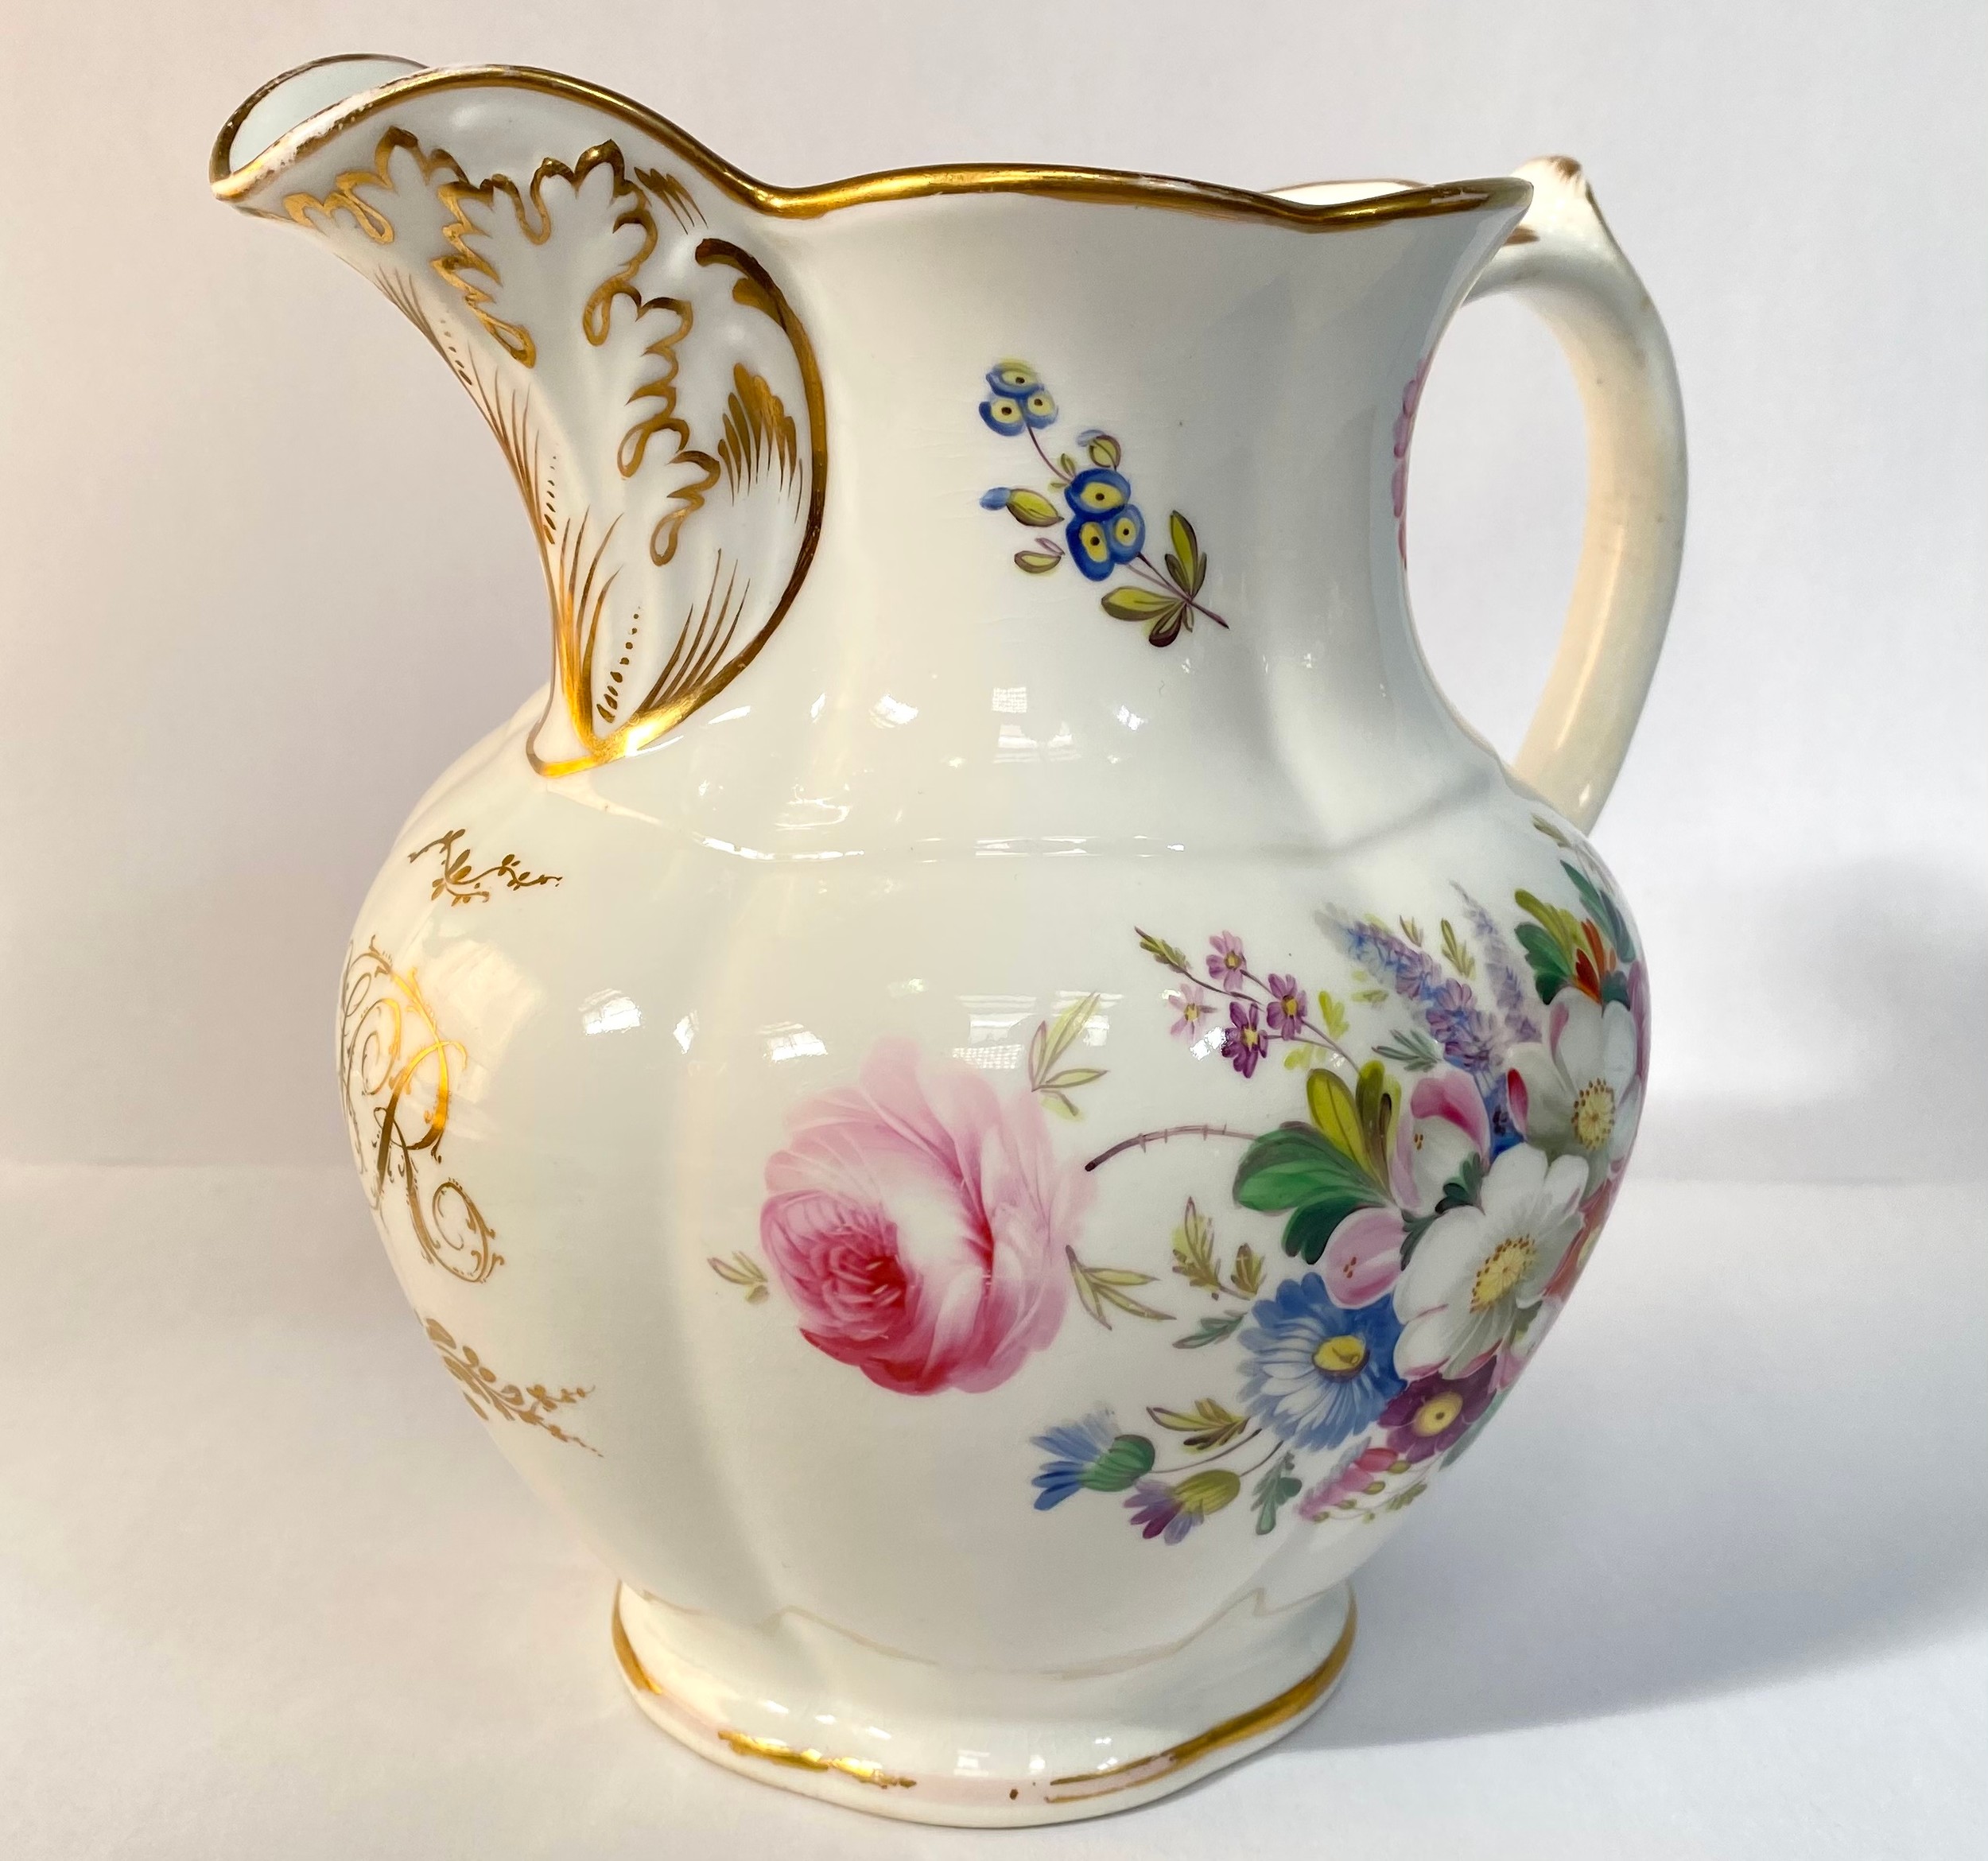 A 19th century porcelain jug, painted with flowers and with a gilt monogram 'VR', 19cm high, - Image 2 of 6